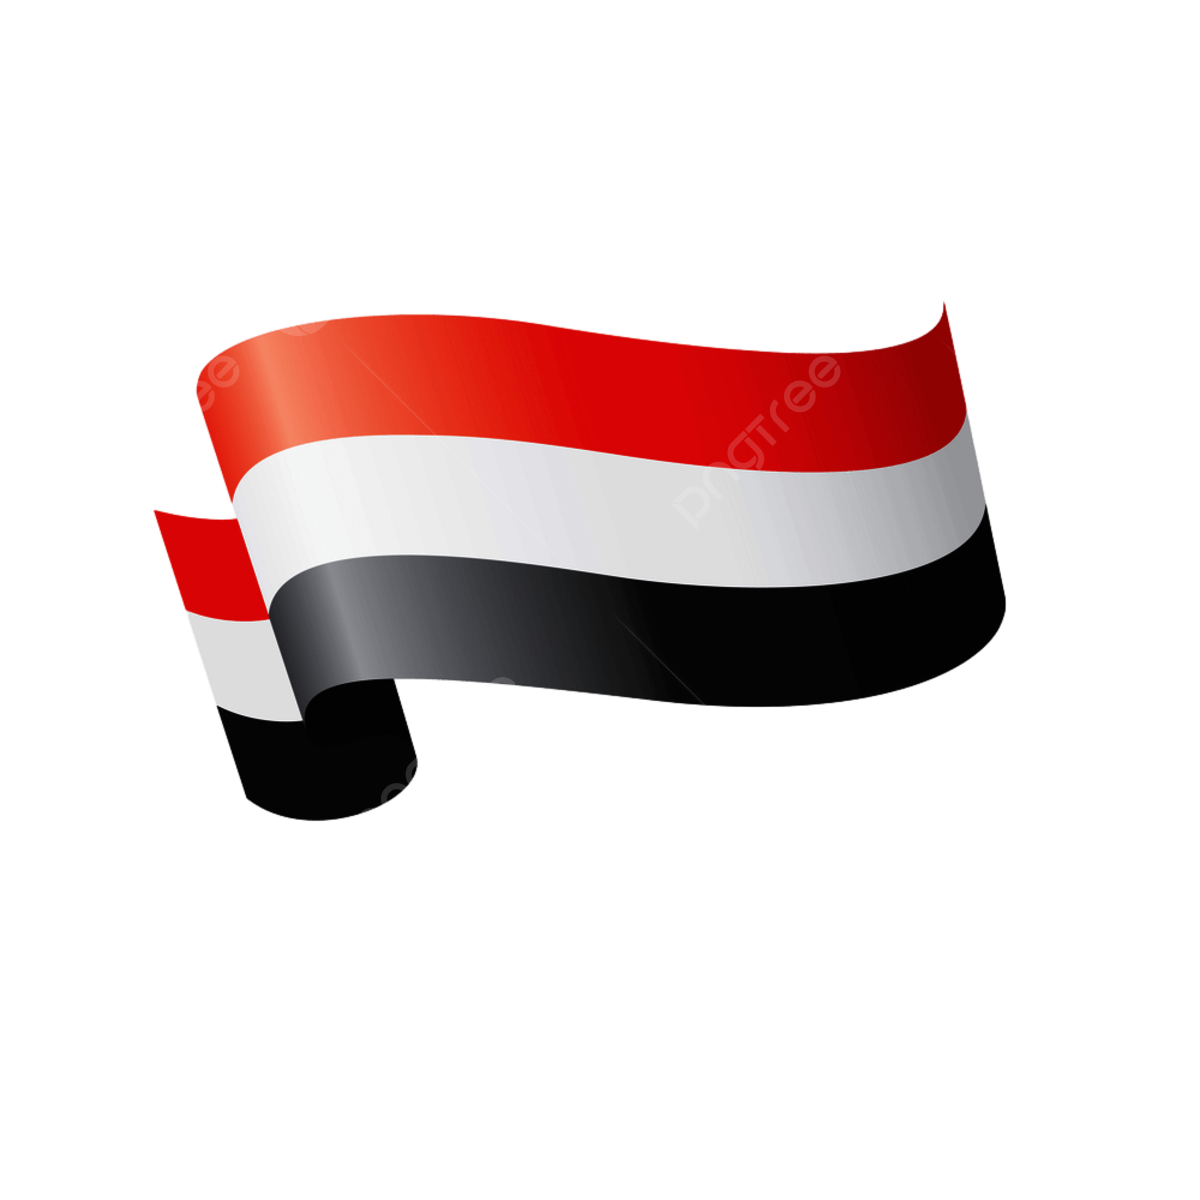 Yemen flag vector design images yemeni flag yemen icon pin pin abstract red png image for free download